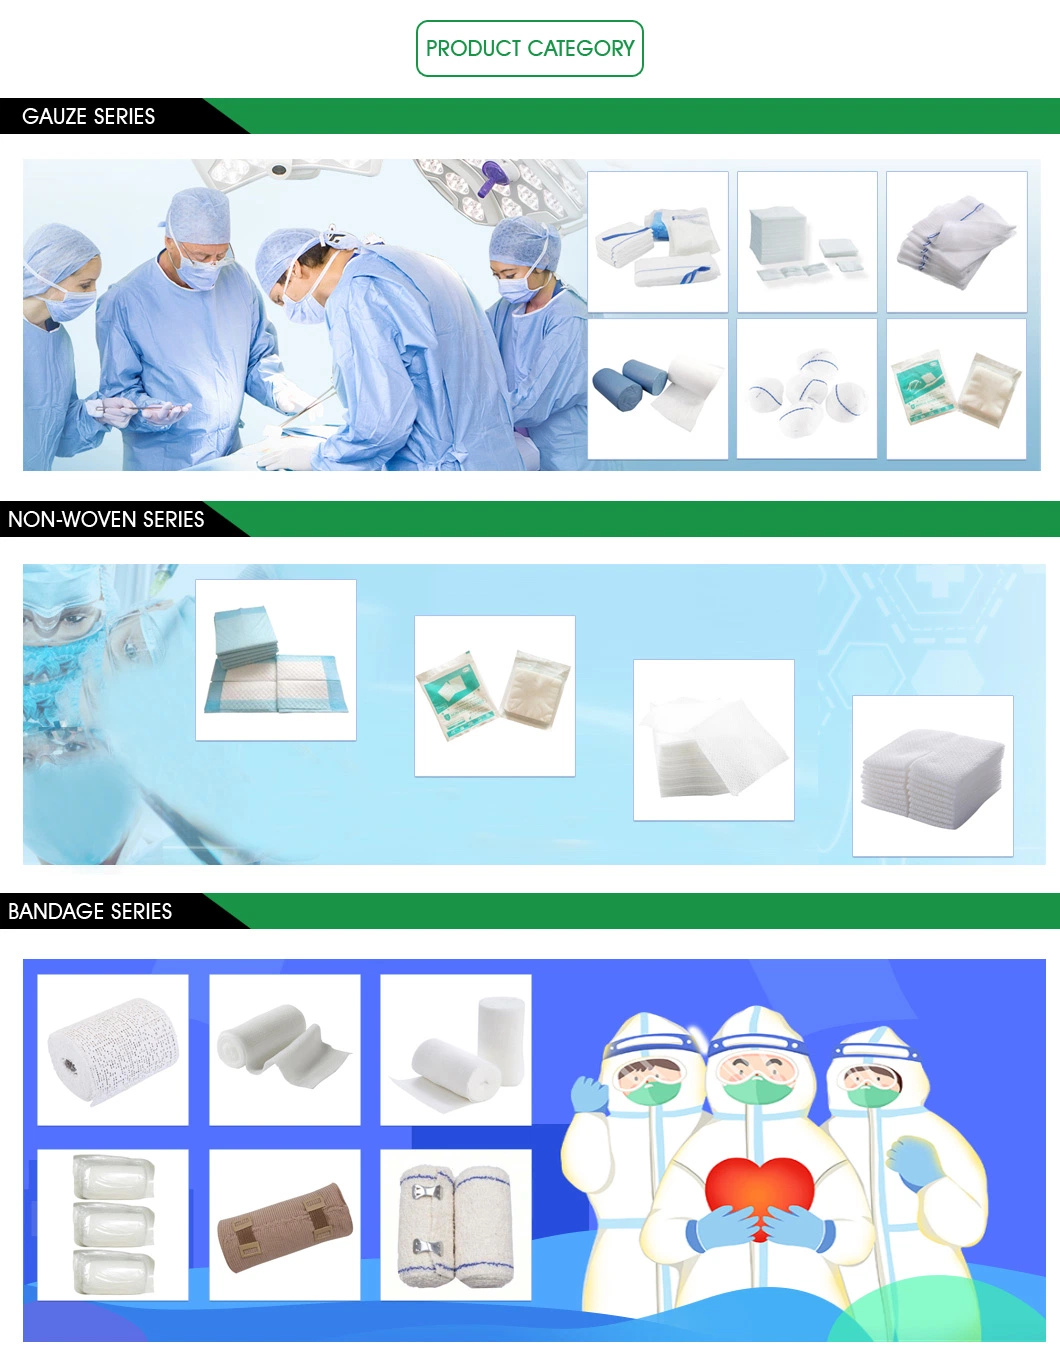 Eo Sterile SMS/PP+PE Surgical Gown for Anti-Virus